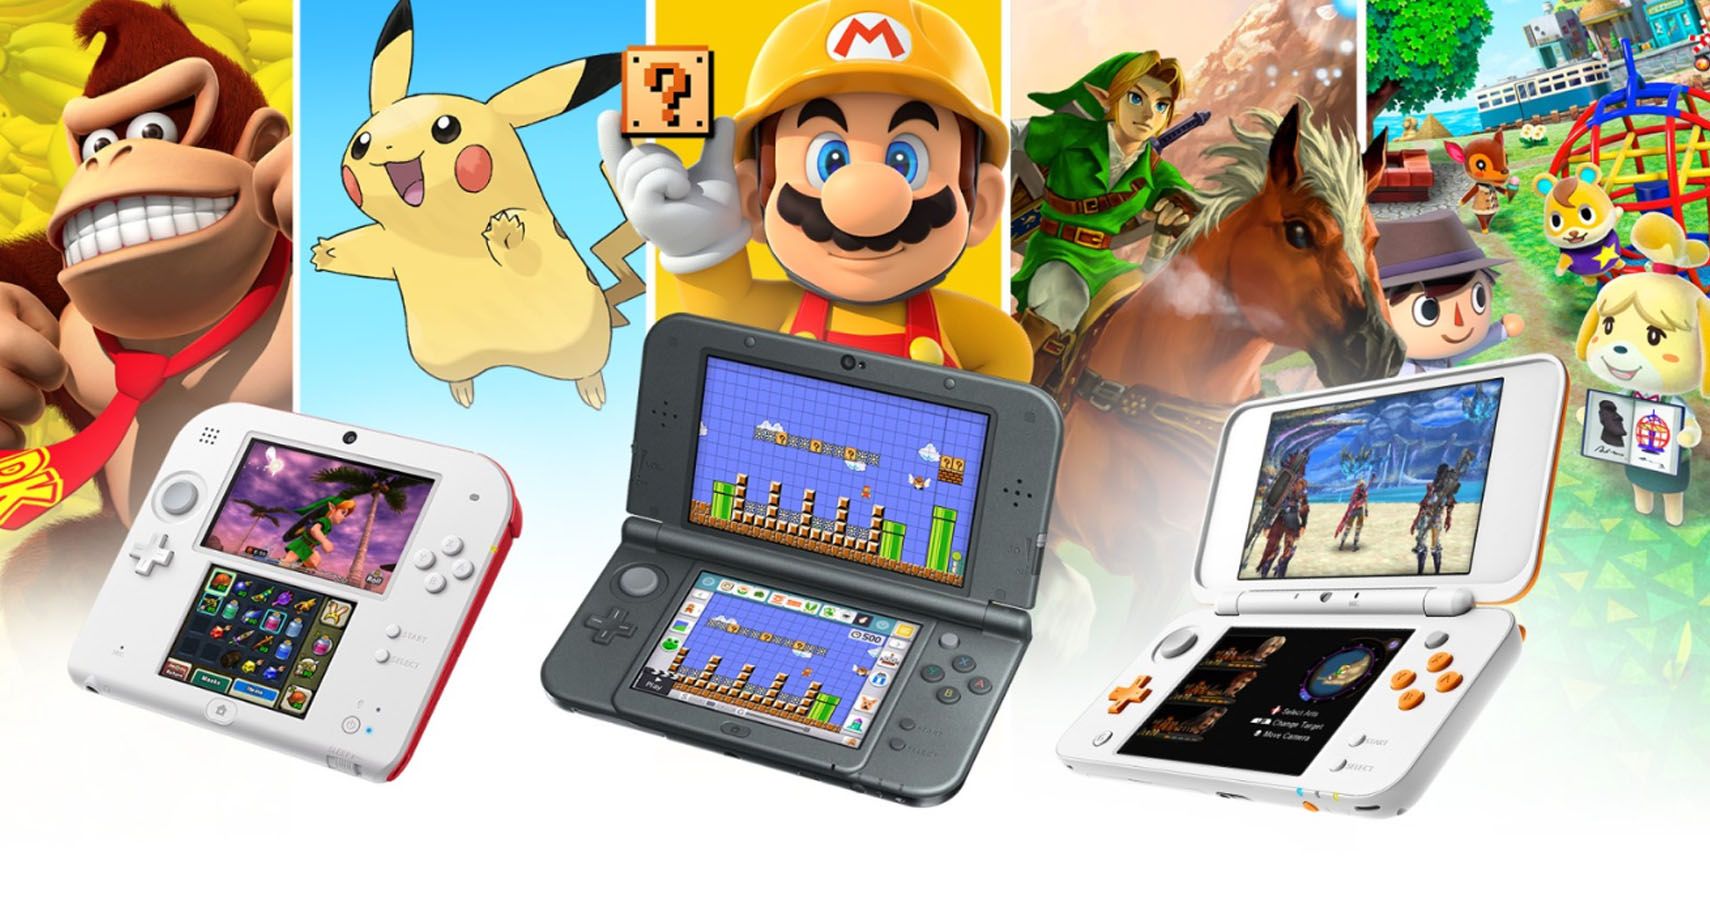 Donky kong, pikachu, mario, link and Isabelle behind 2DS, 3DS and 3DSXL consoles.